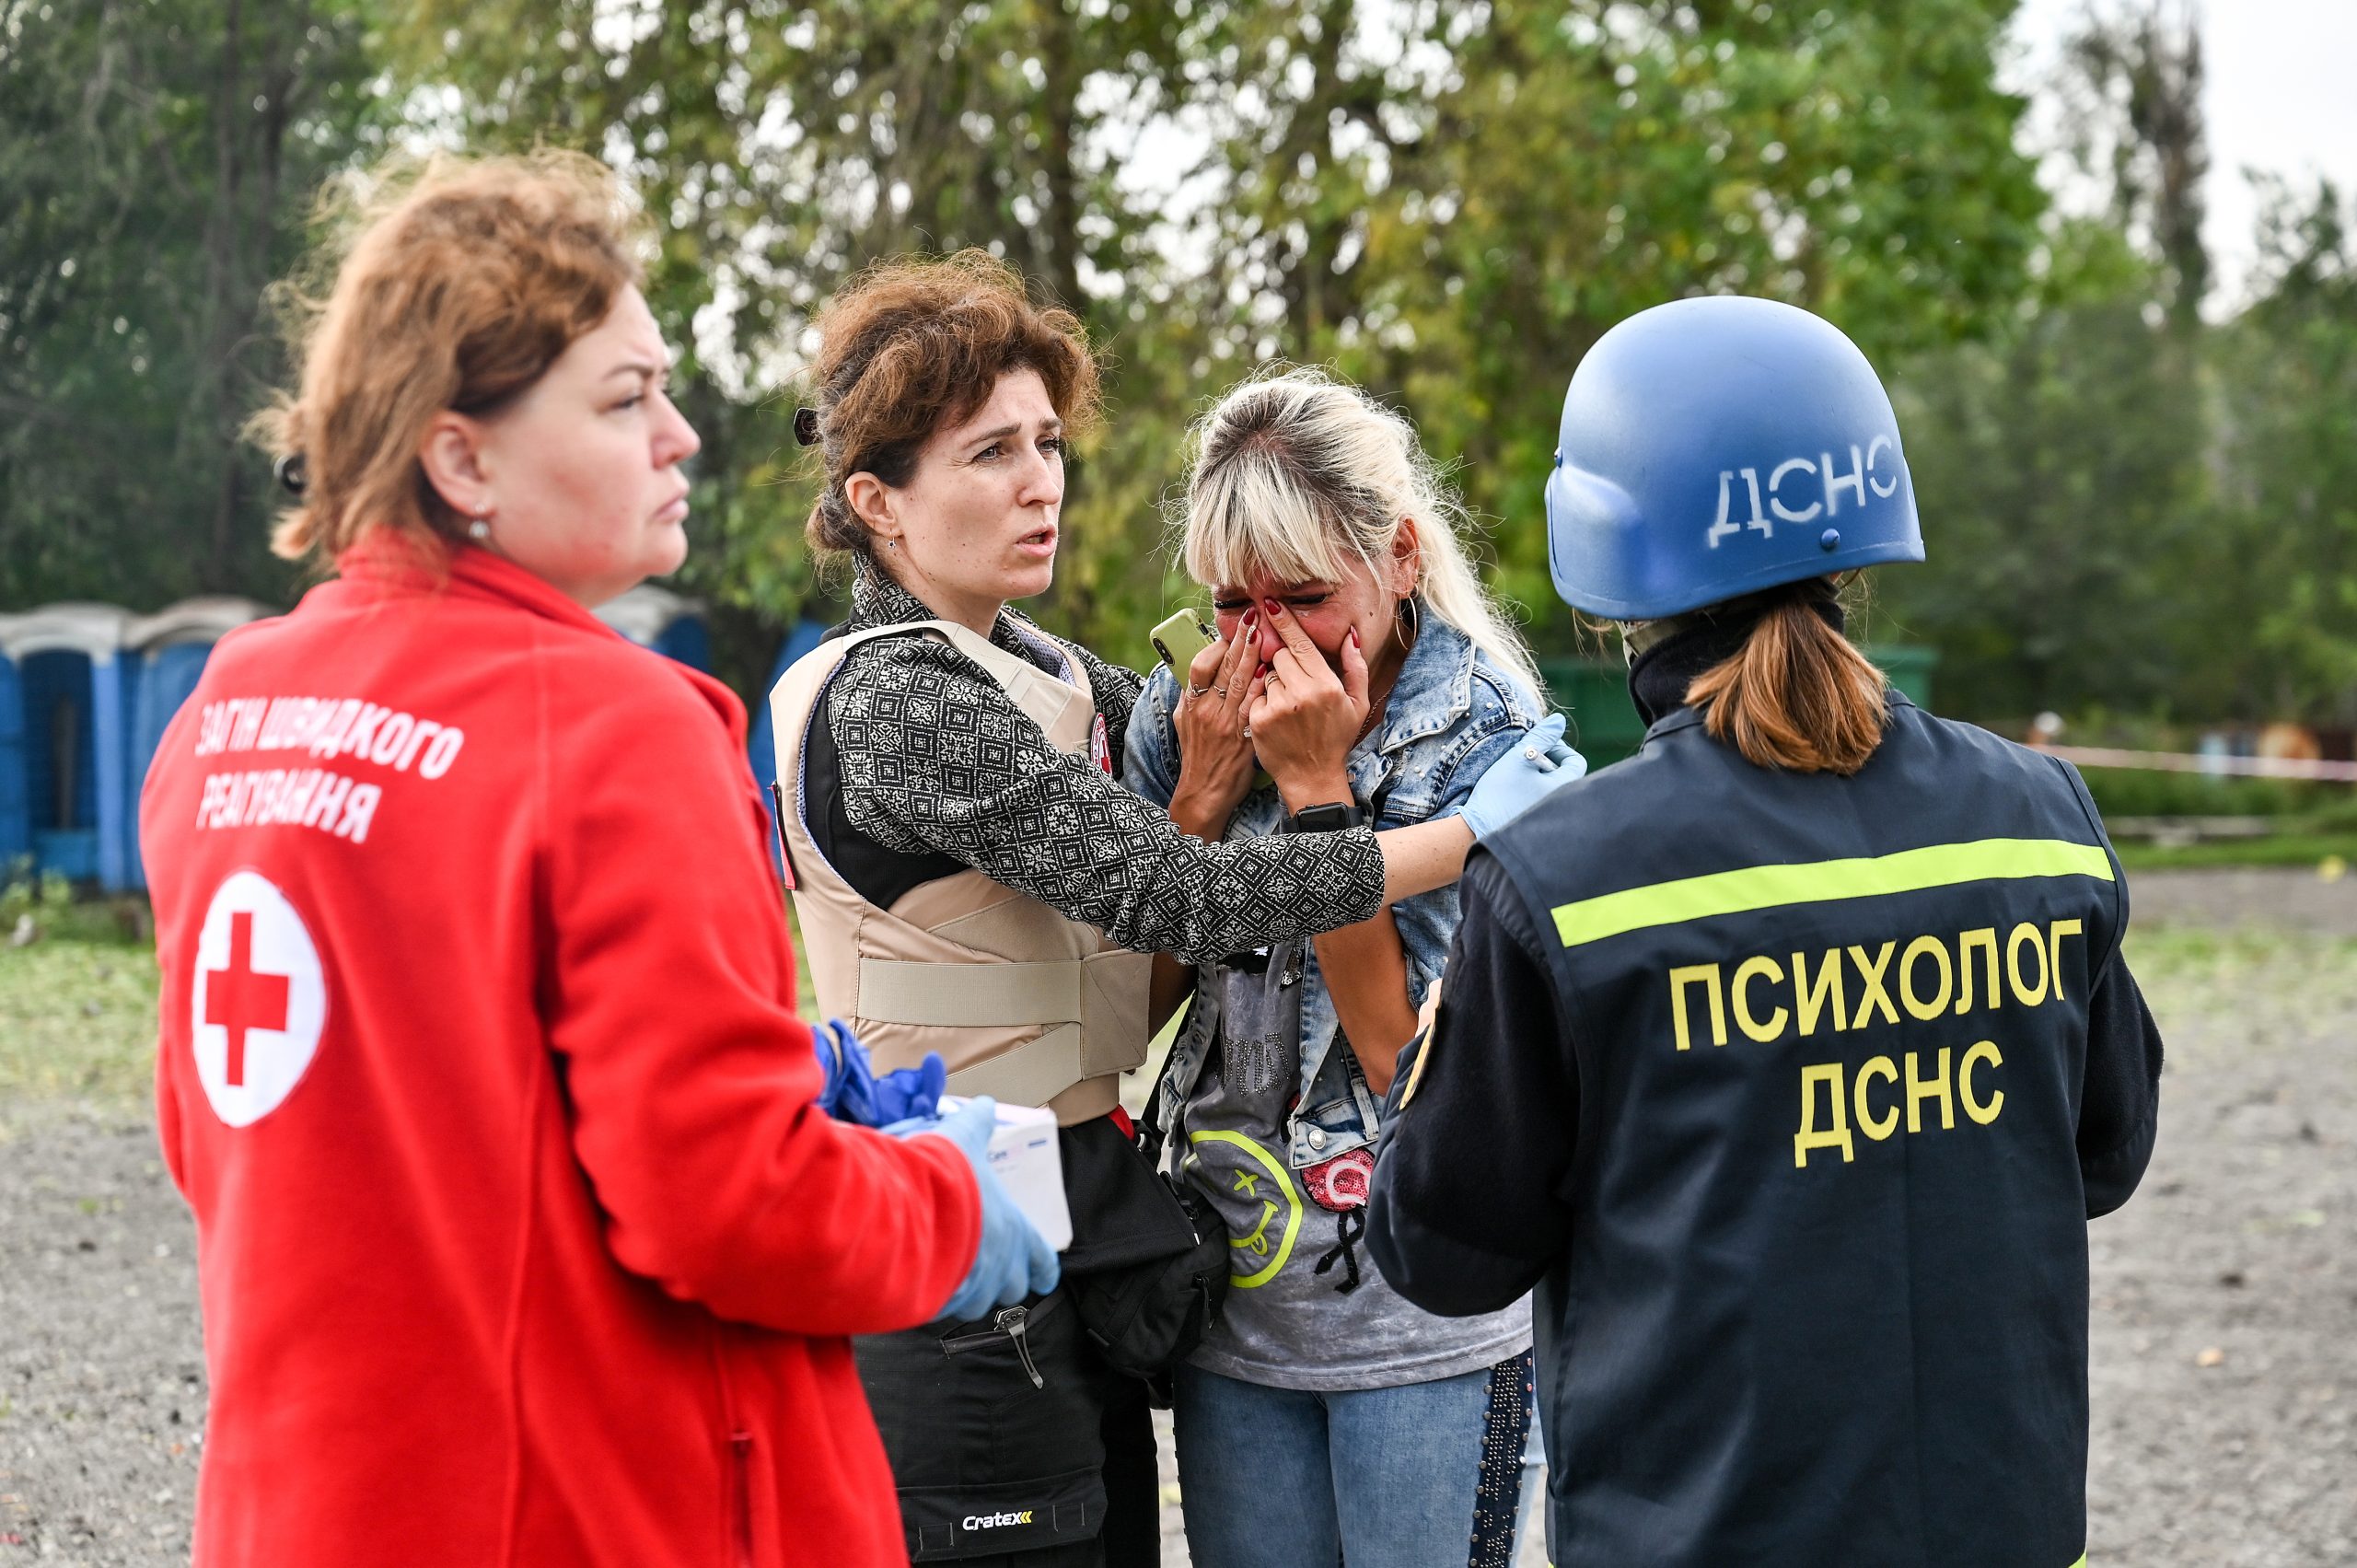 Photo: ZAPORIZHZHIA, UKRAINE - SEPTEMBER 30, 2022 - Workers of the Ukrainian Red Cross Society and a psychologist of the State Emergency Service comfort a woman at the scene of a deadly Russian missile strike on a humanitarian convoy in Zaporizhzhia, southeastern Ukraine. Credit: Dmytro Smolienko via Reuters Connect